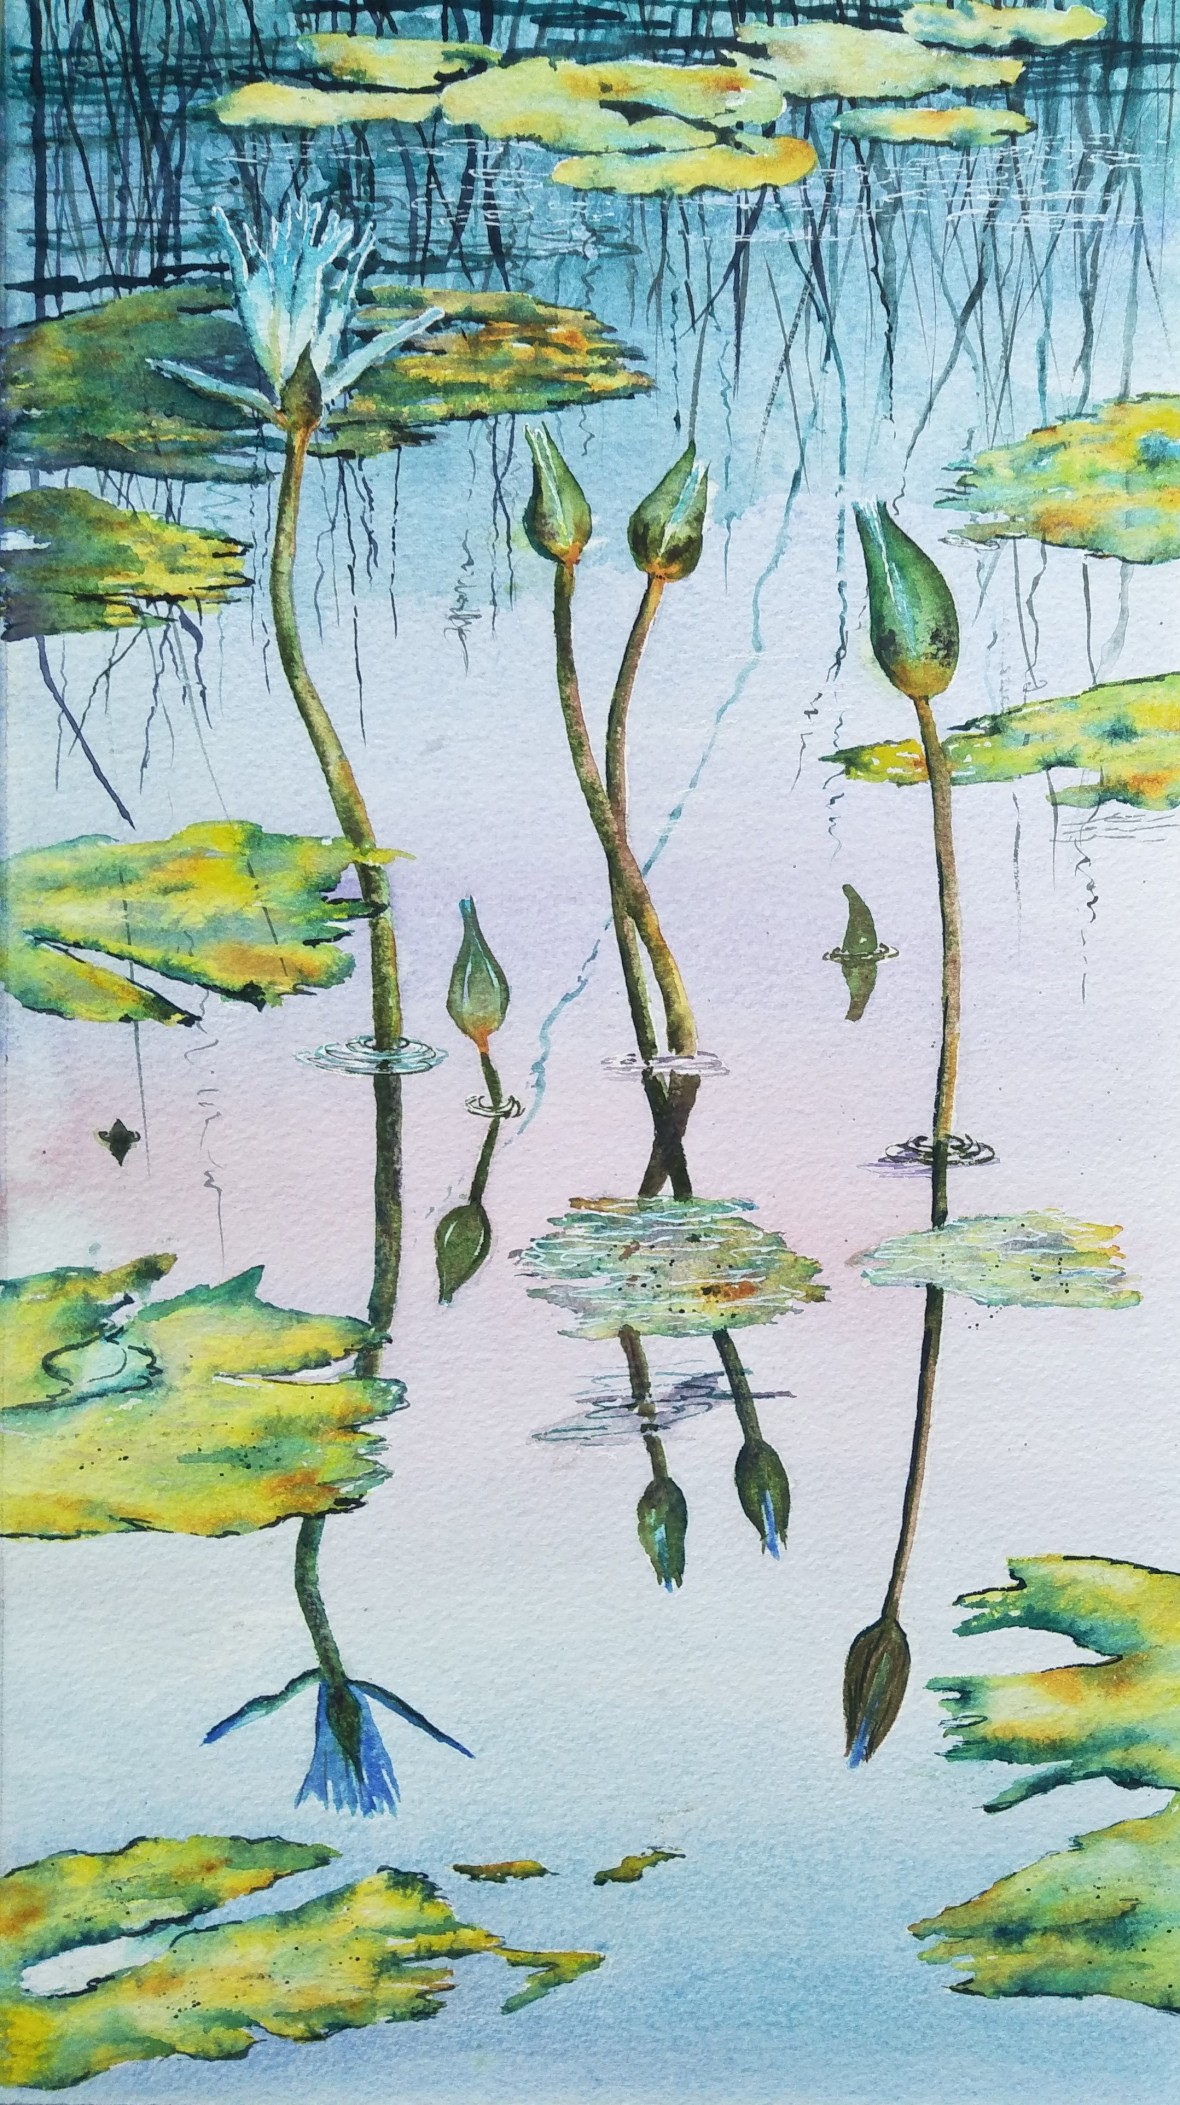 2018-08-07 Reflections Water Lilies